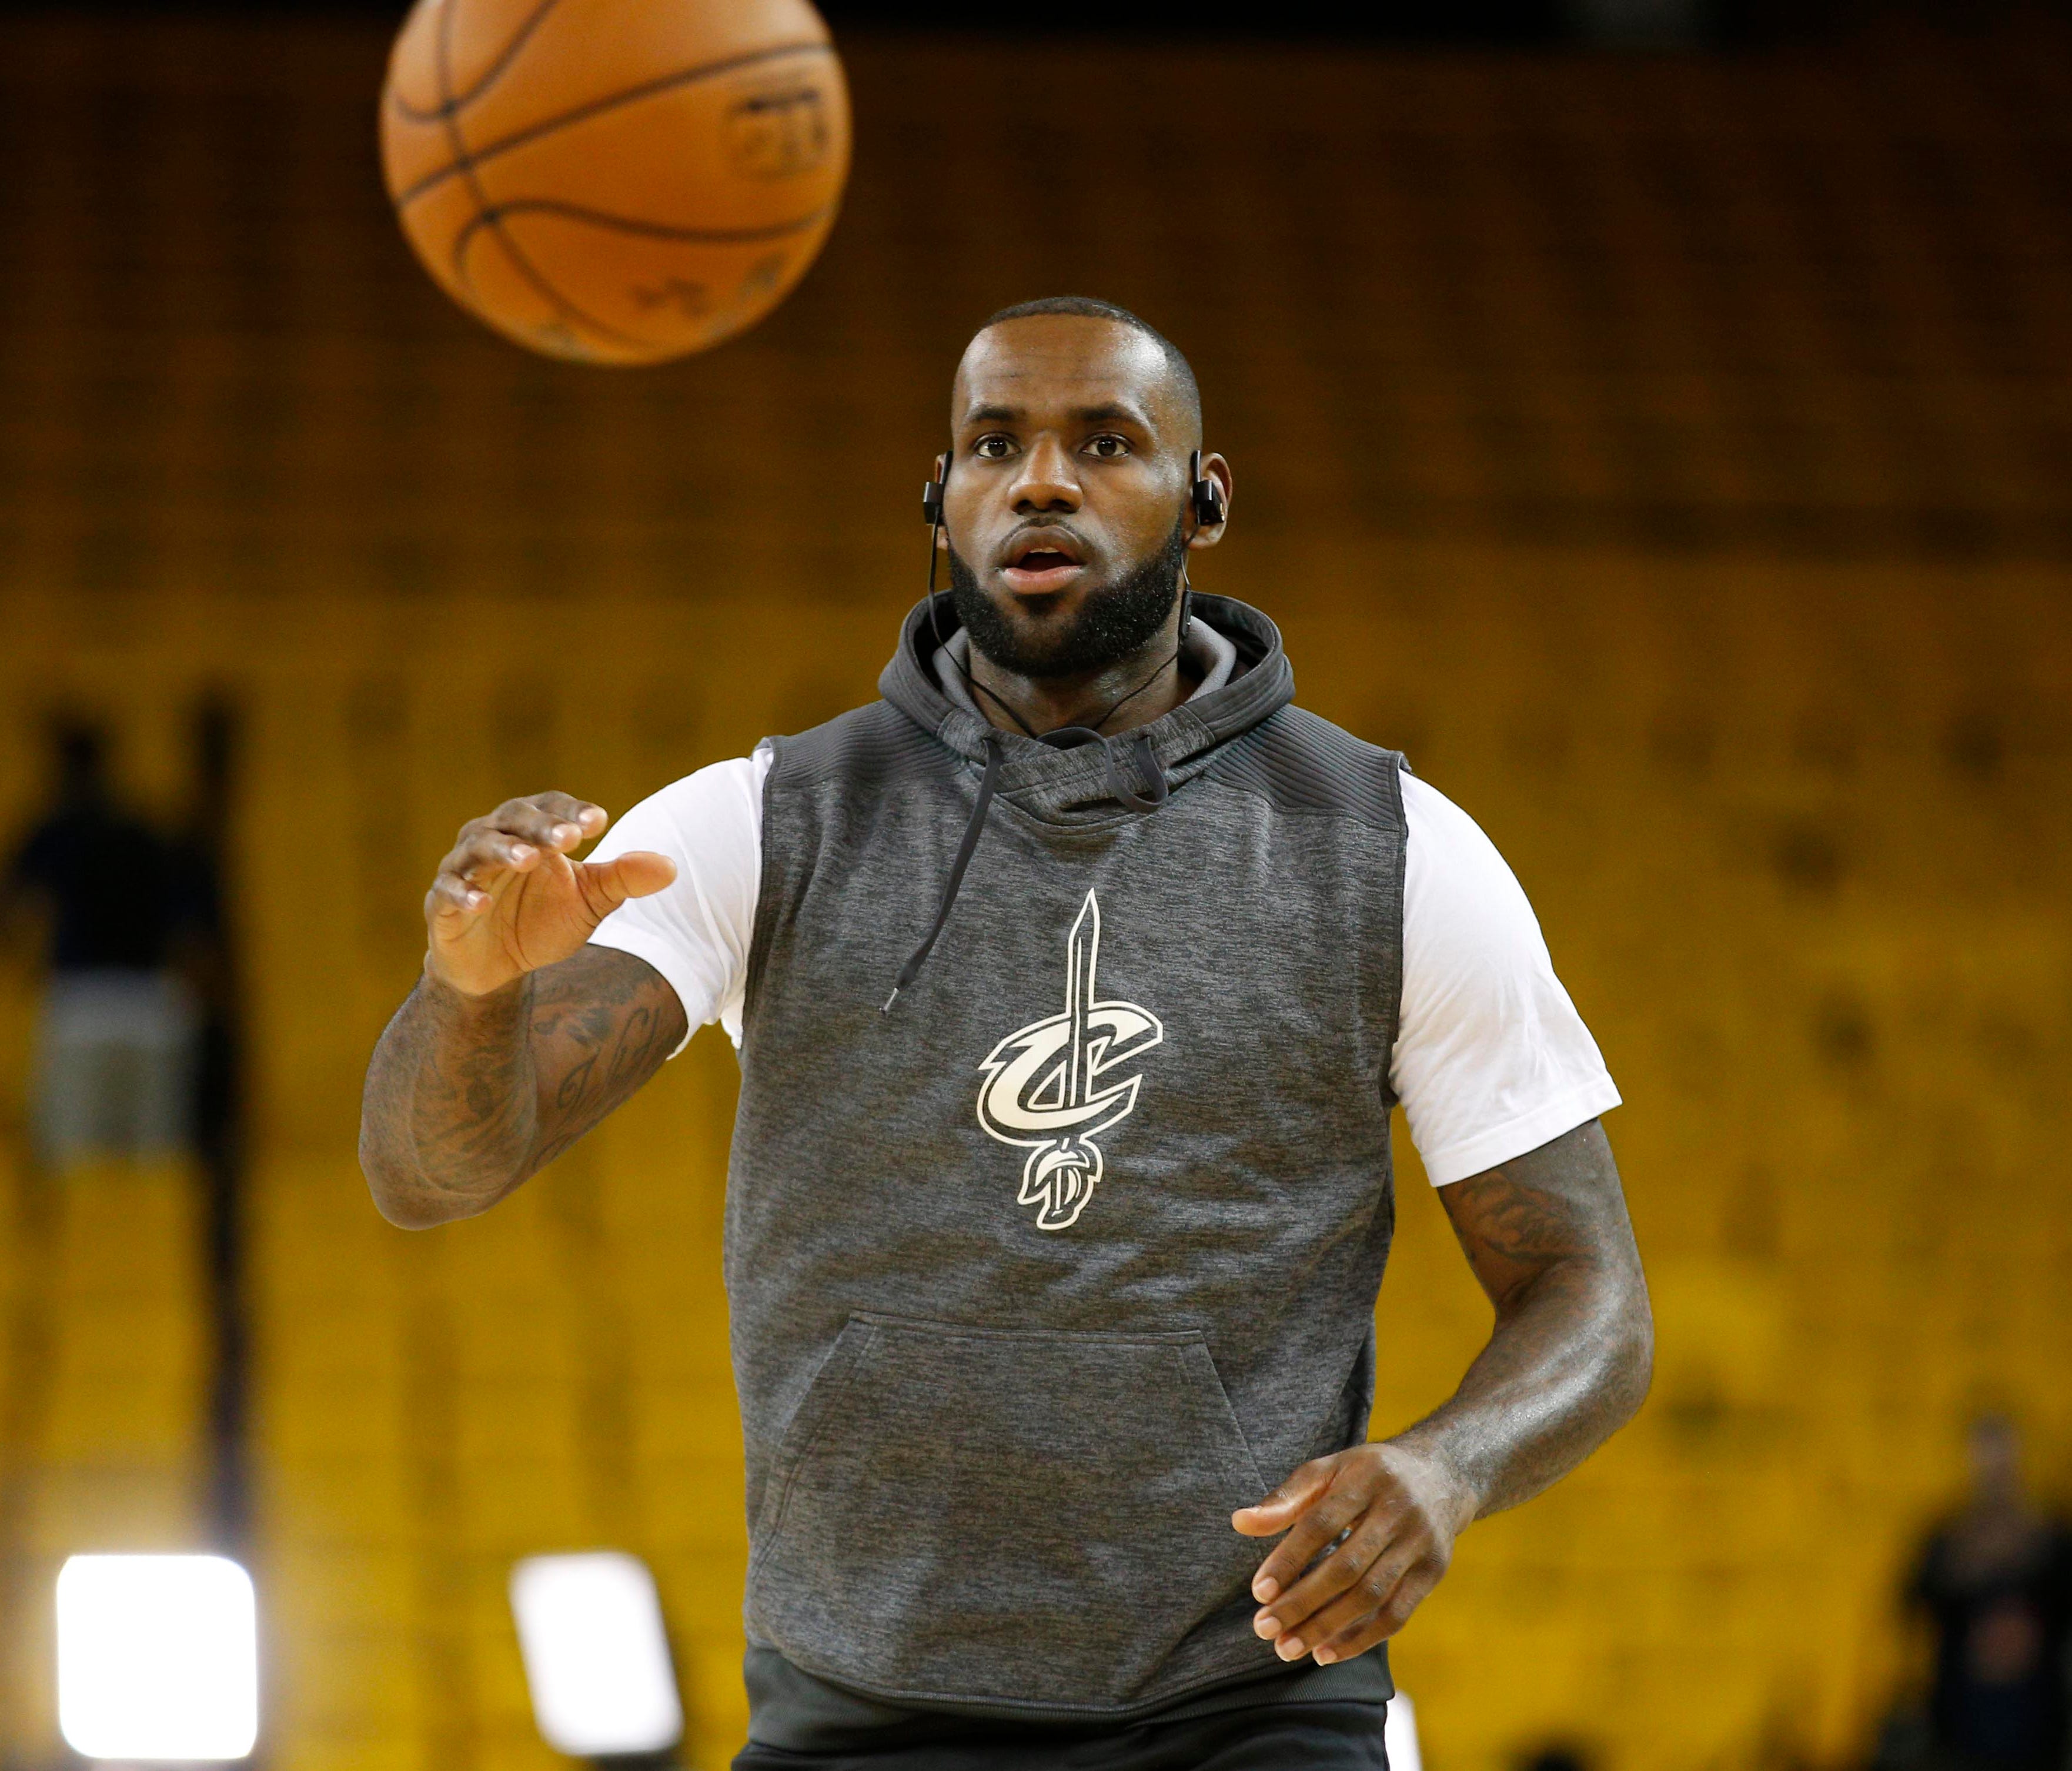 Cleveland Cavaliers forward LeBron James warms up before Game 1 of the NBA Finals.